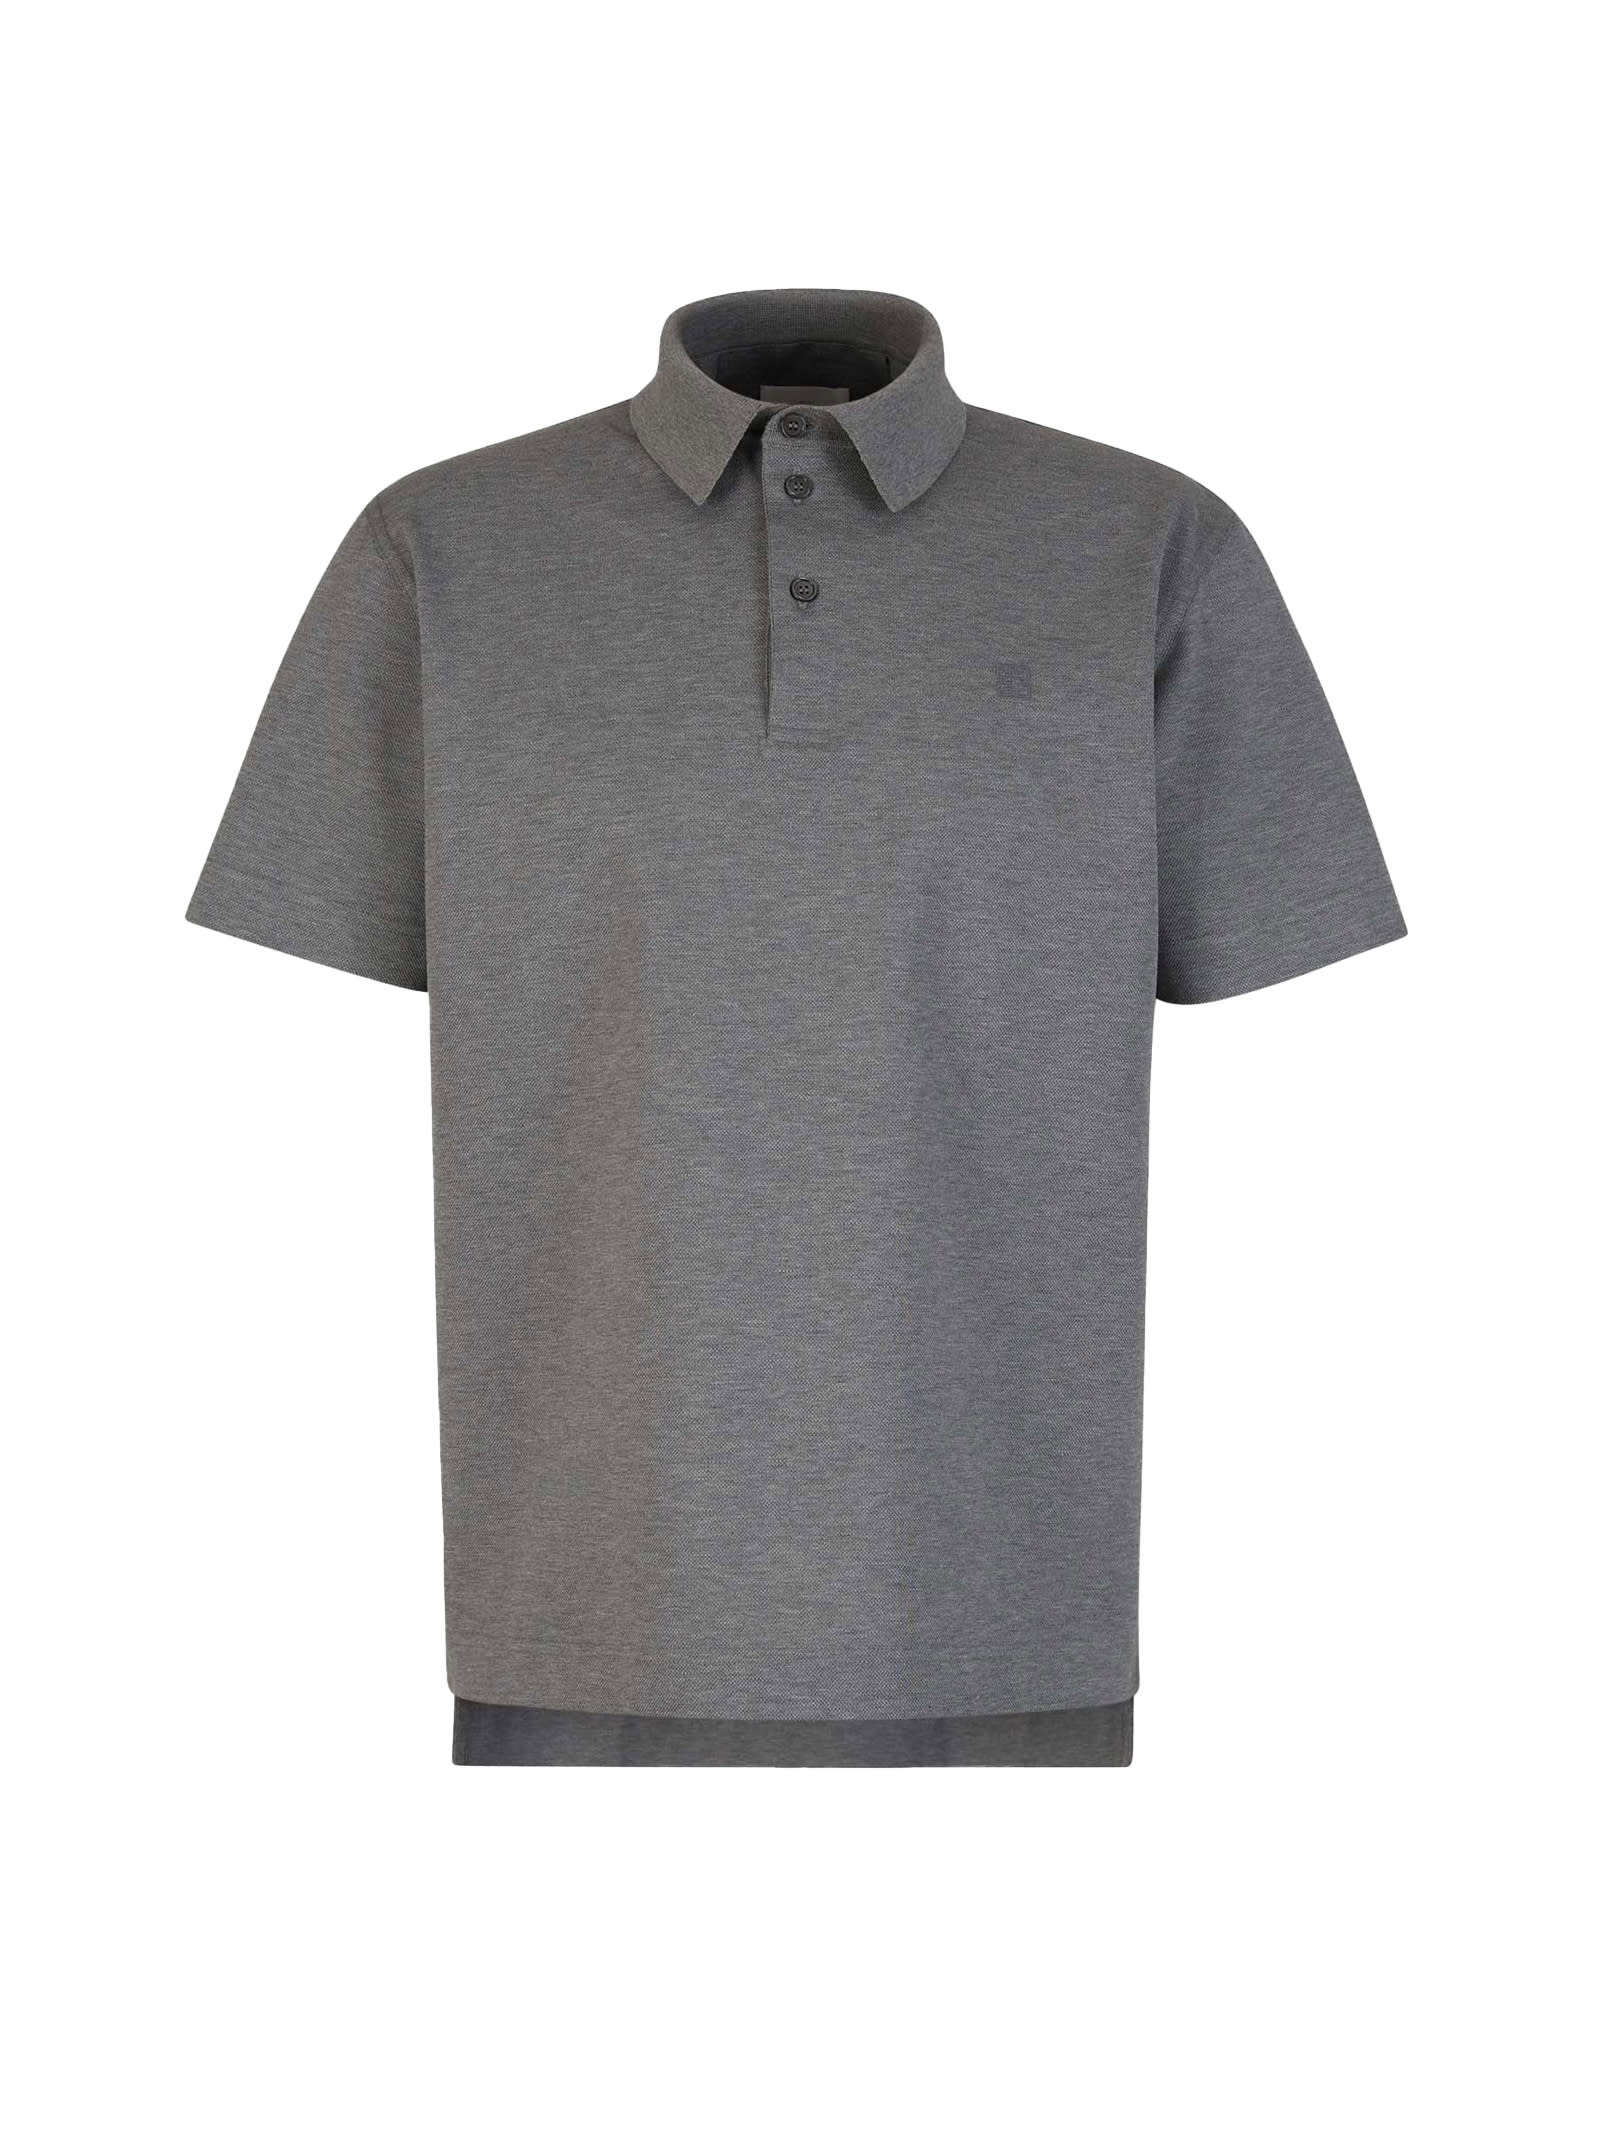 Givenchy Short-sleeved Cotton Polo Shirt In Light Grey Melange